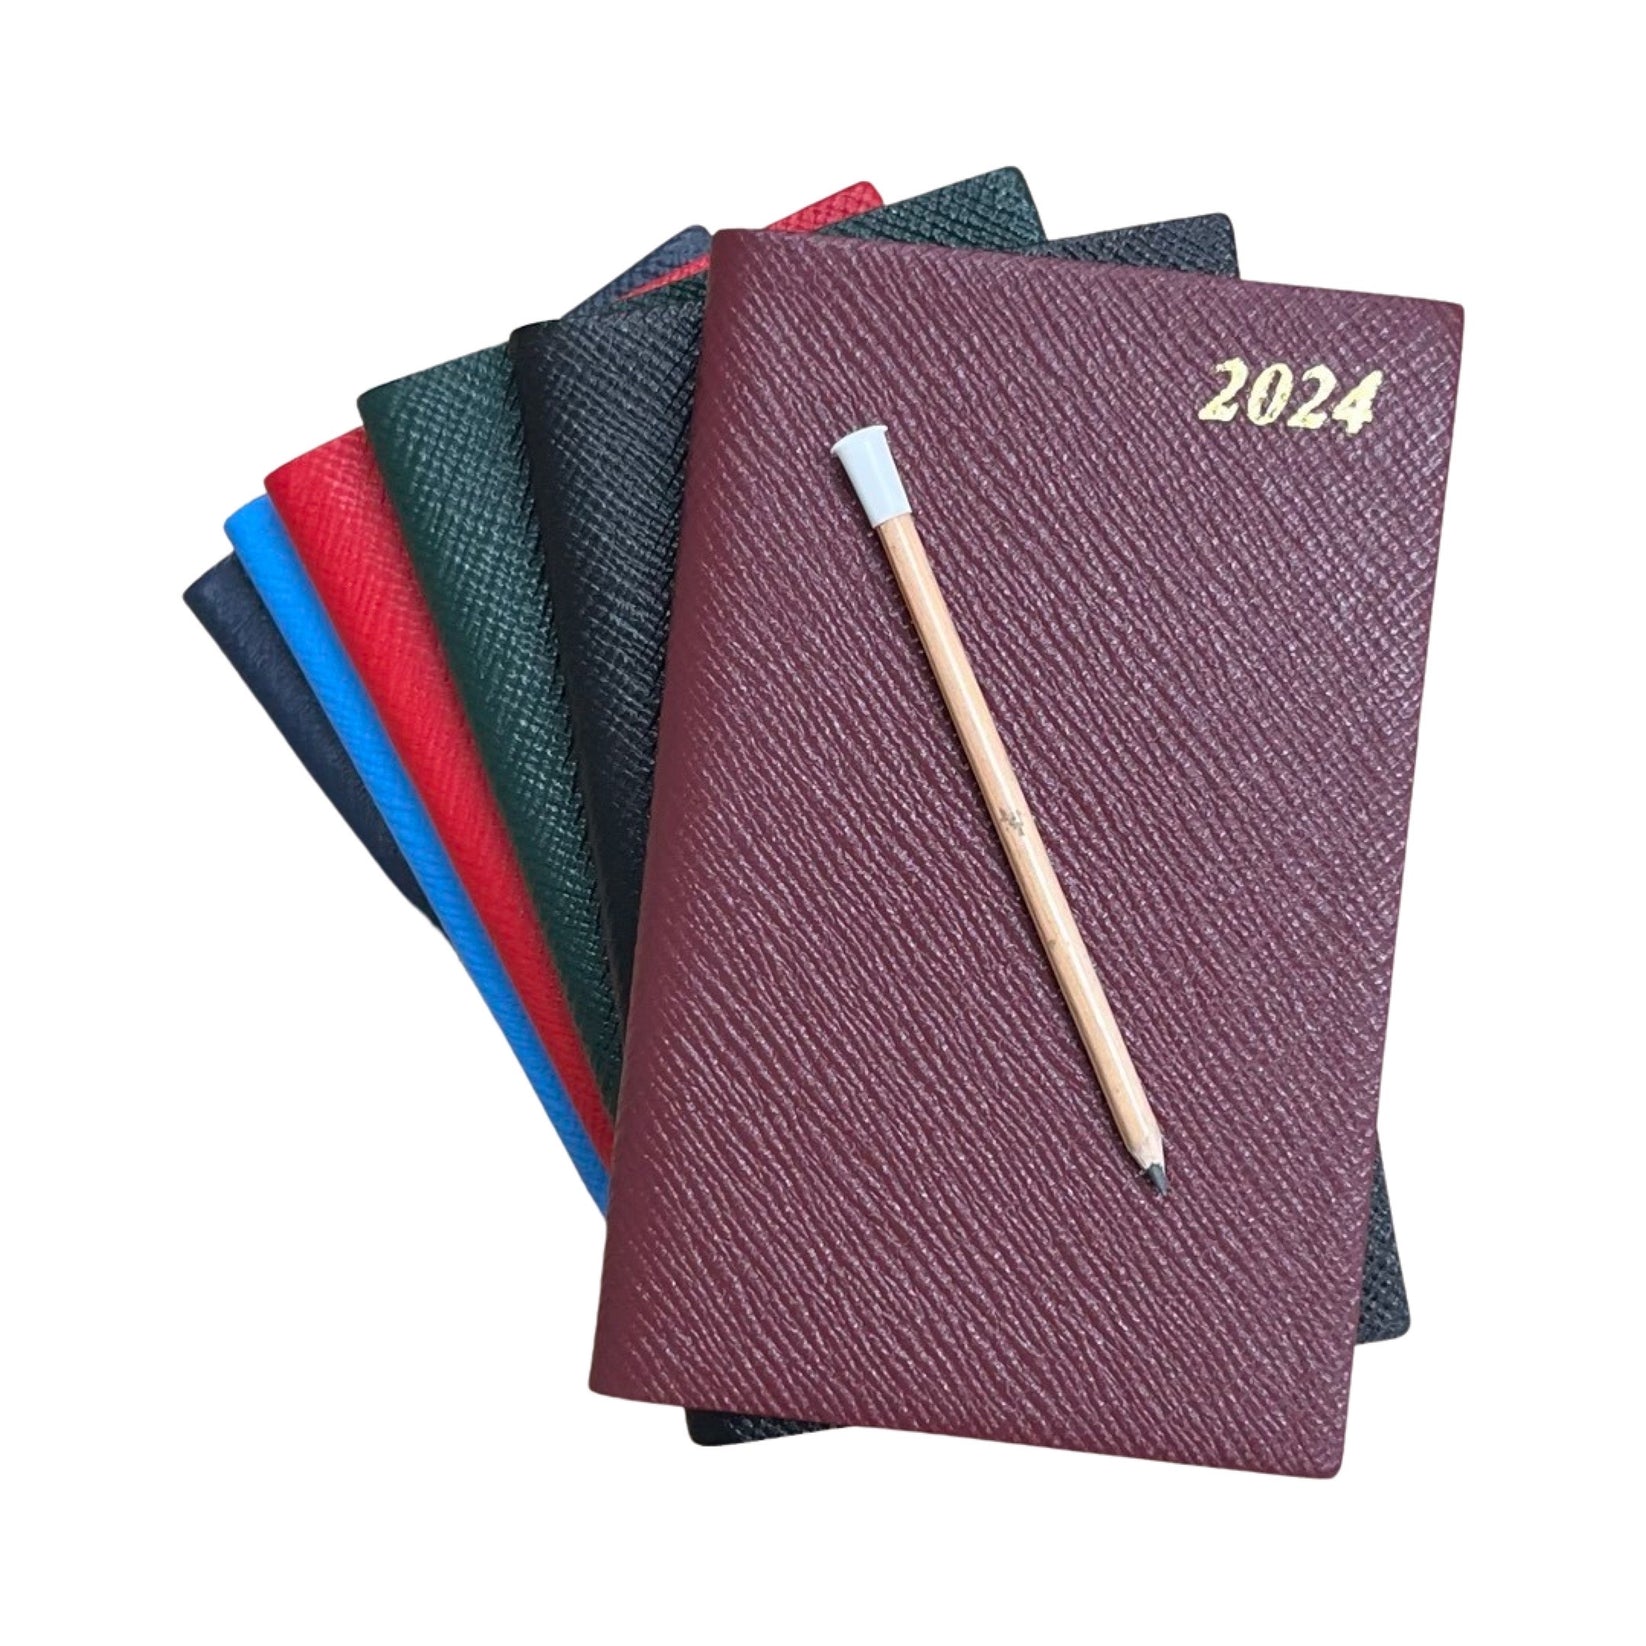 2023 5x3 Leather Pocket Calendar with Pencil Charing Cross D753LJ